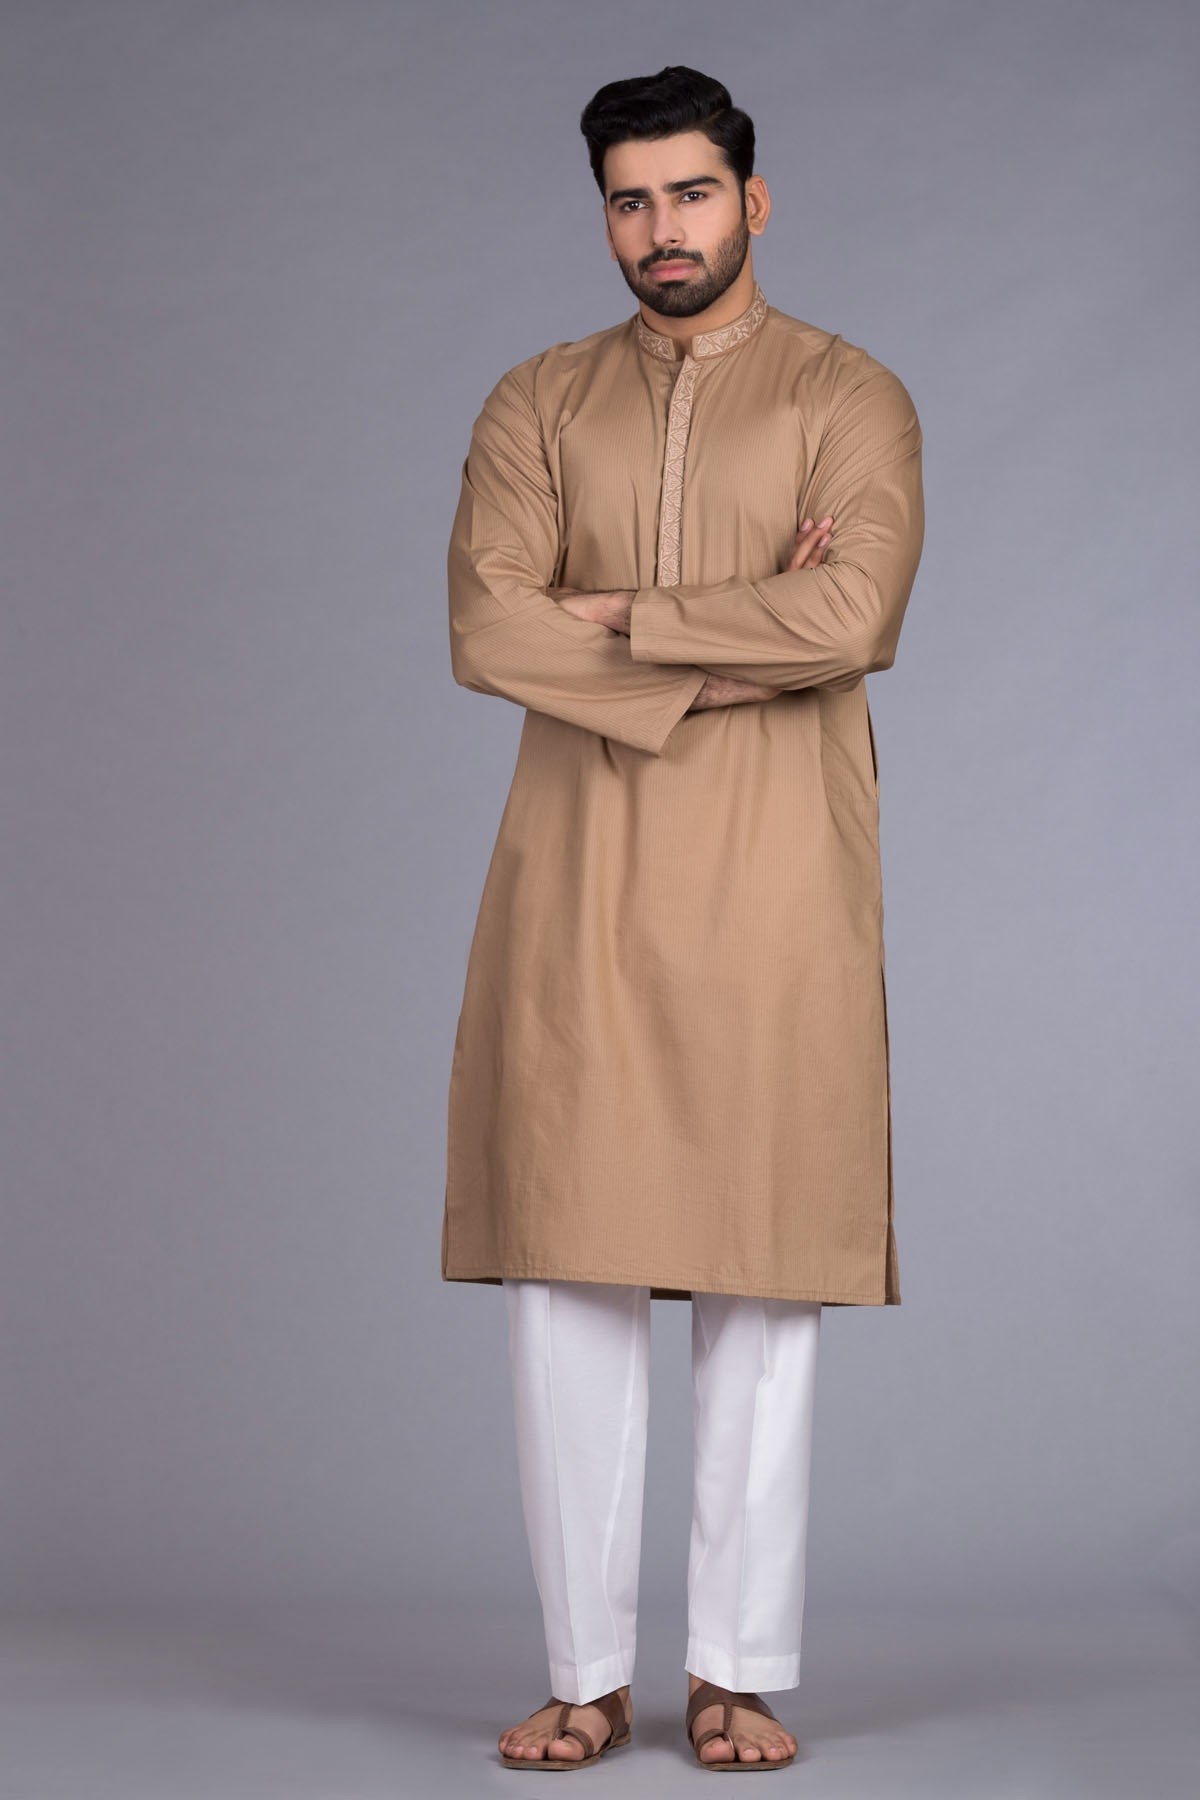 Limelight Eid Collection for mens